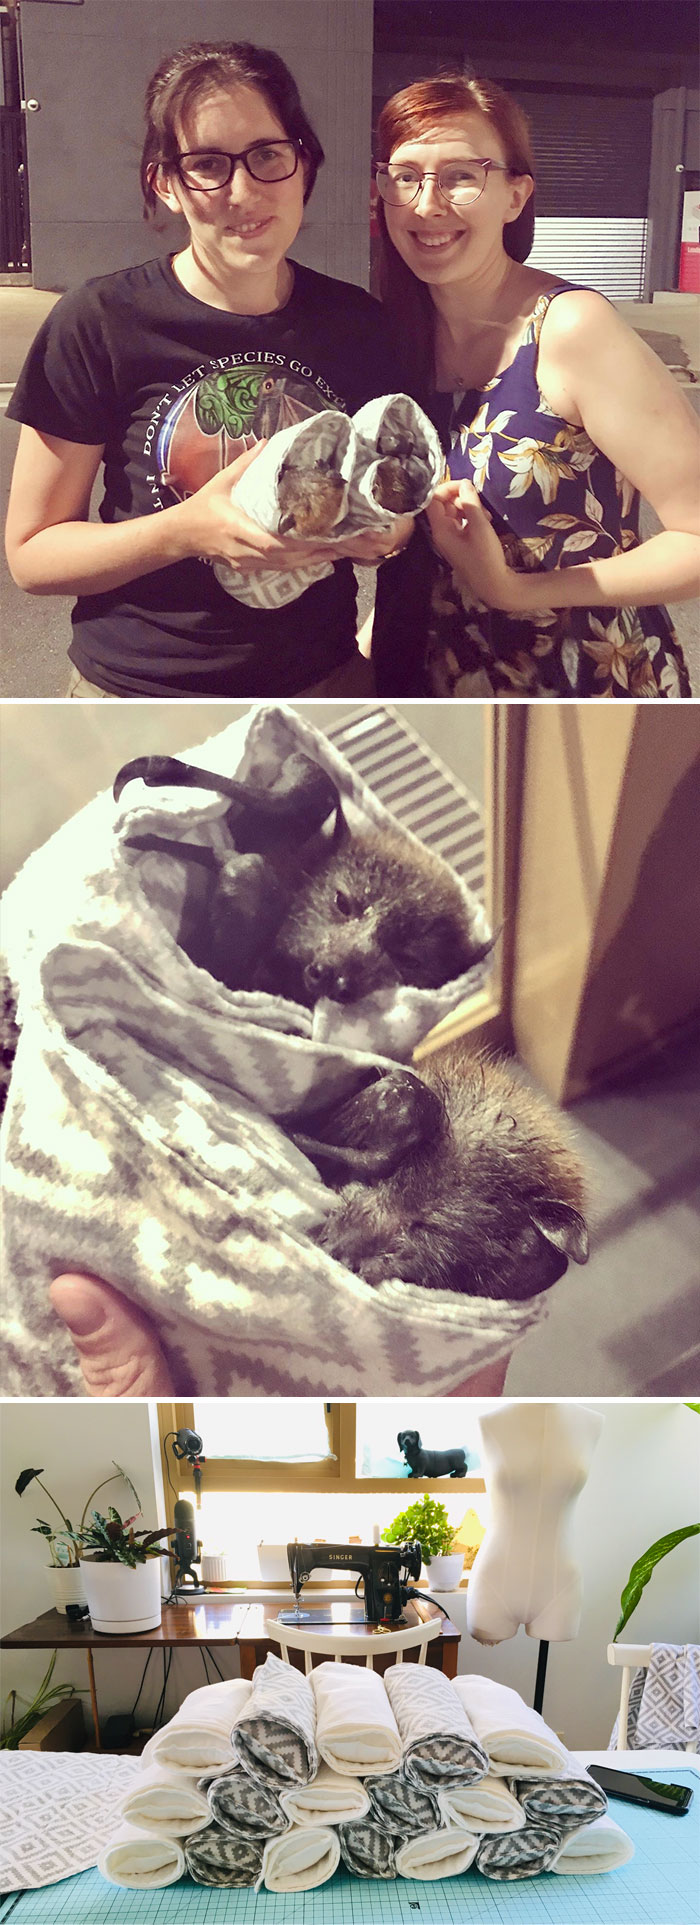 Tonight I Got To Meet The Baby Orphan Bats Of The Aussie Bushfires That I Made The Wraps For